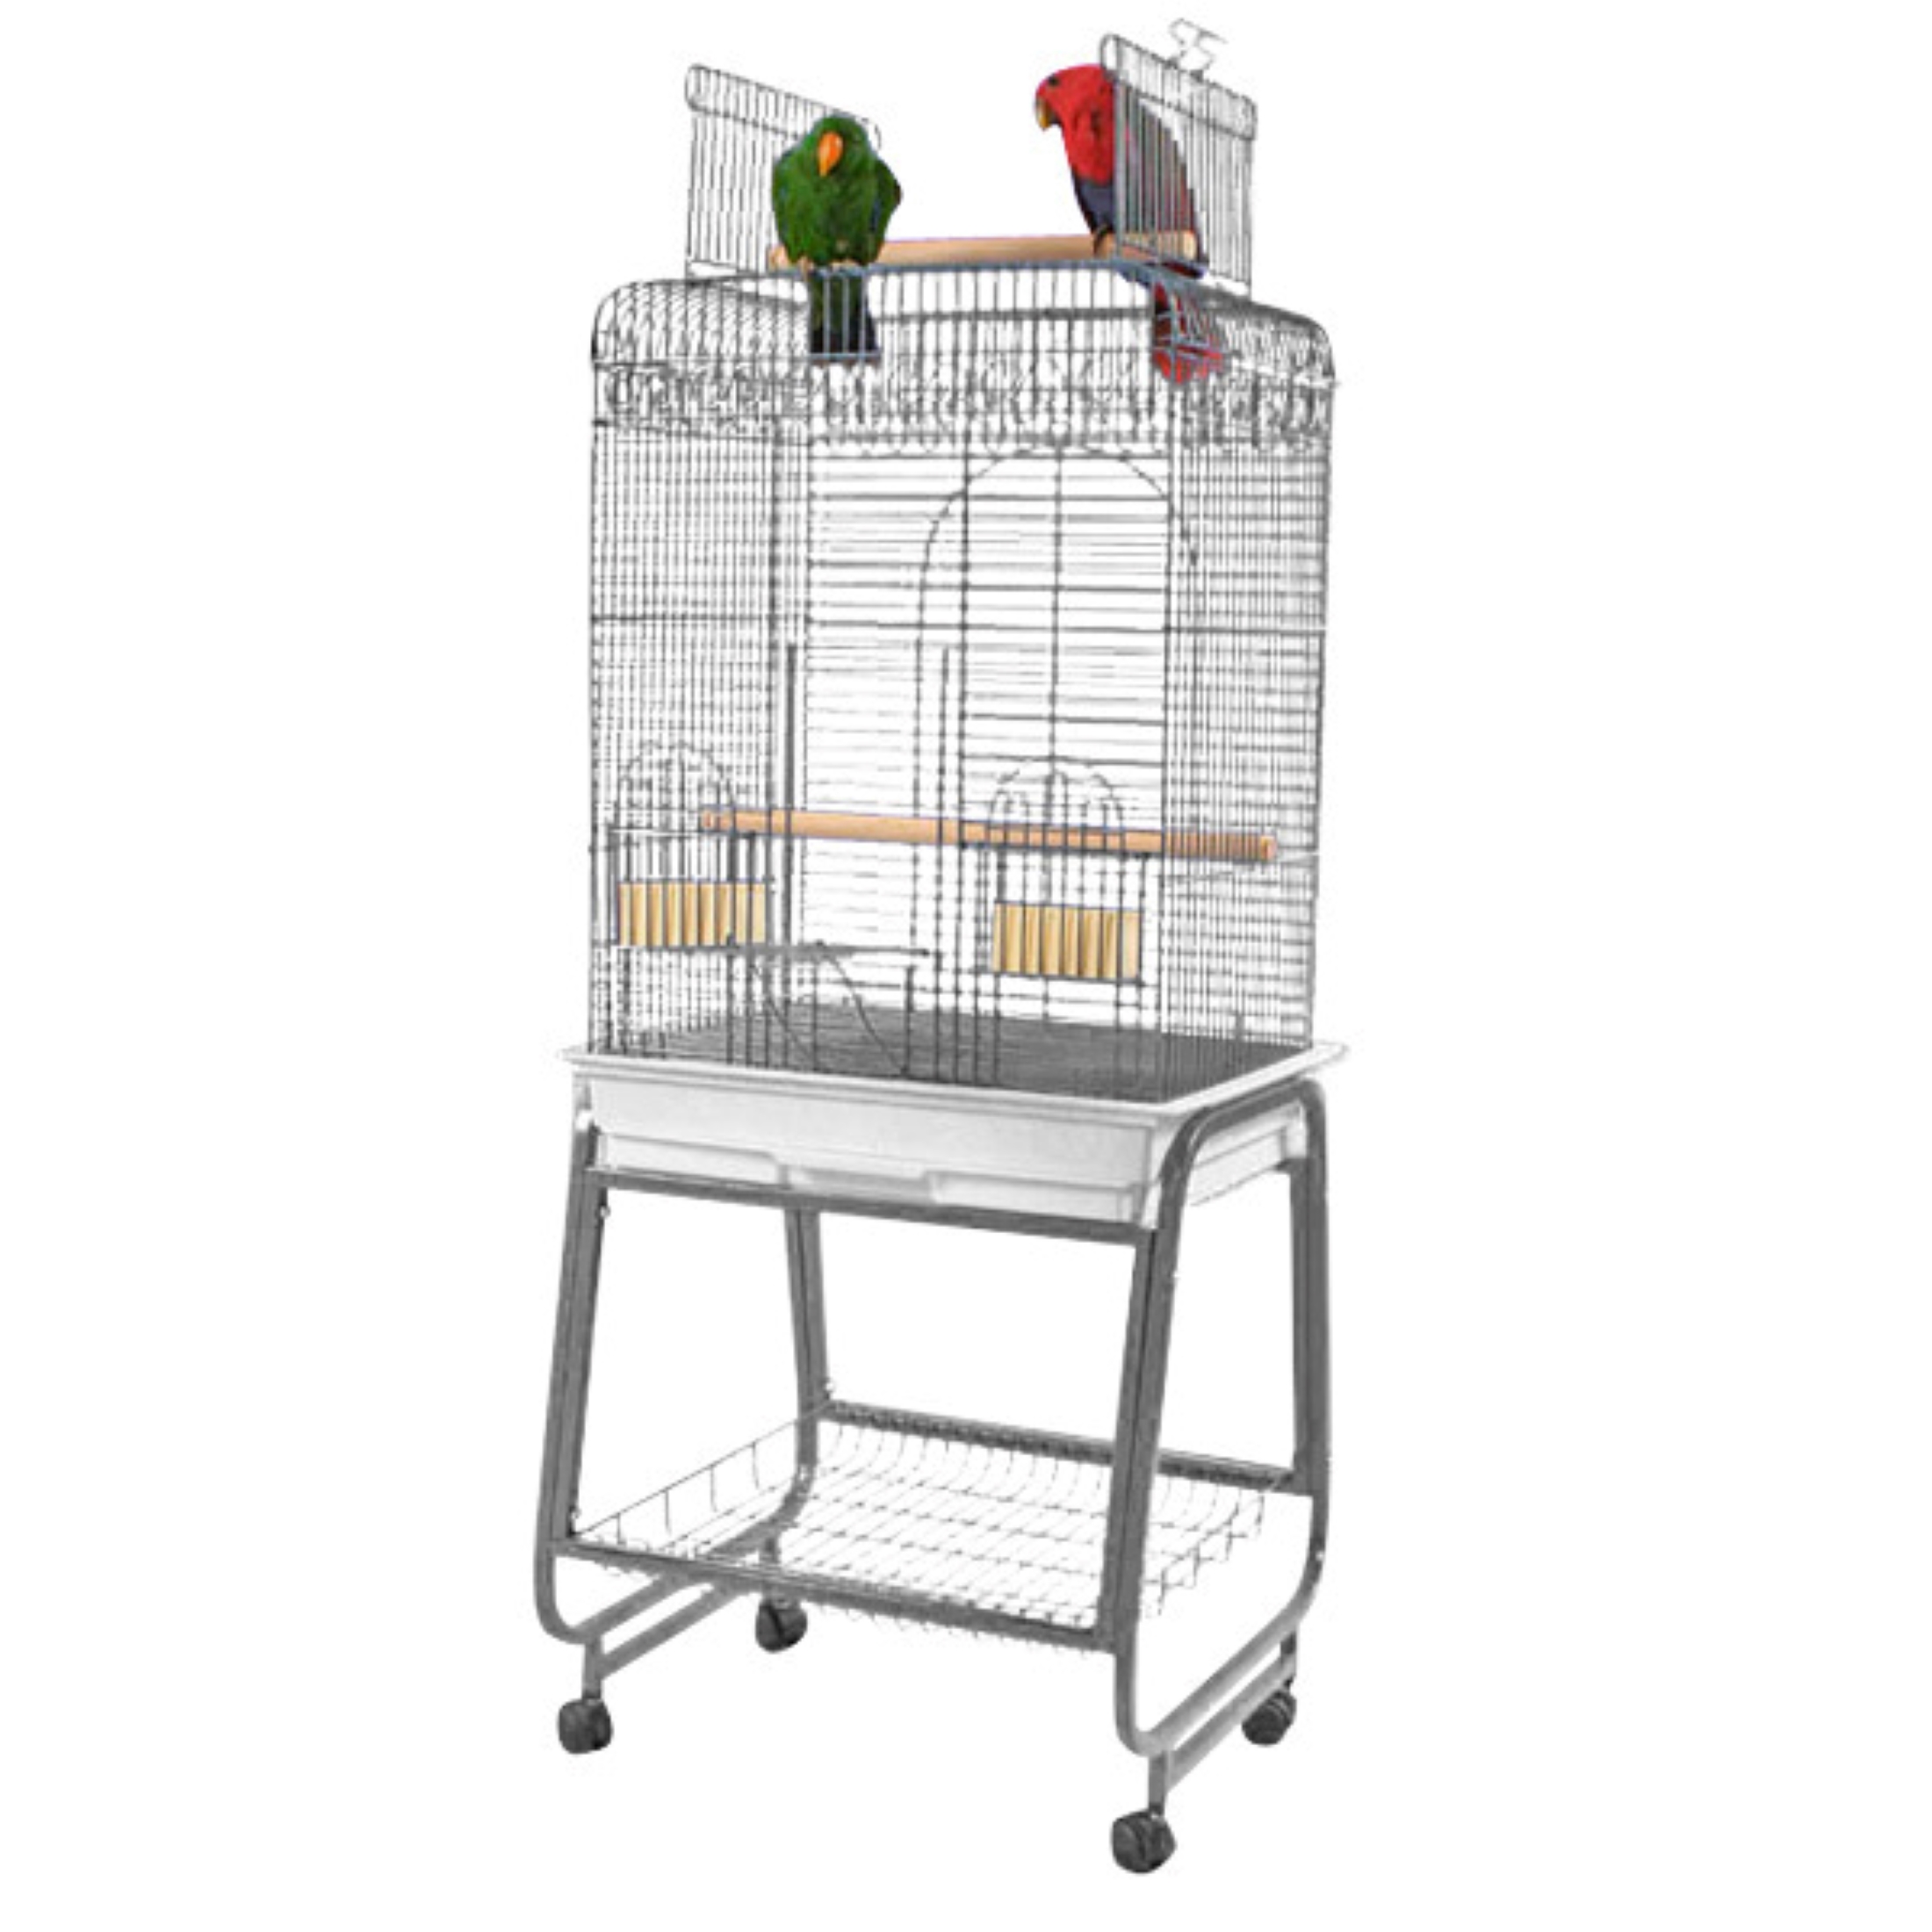 A and E Cage Co. Winston Playtop Cage-Platinum - image 1 of 5